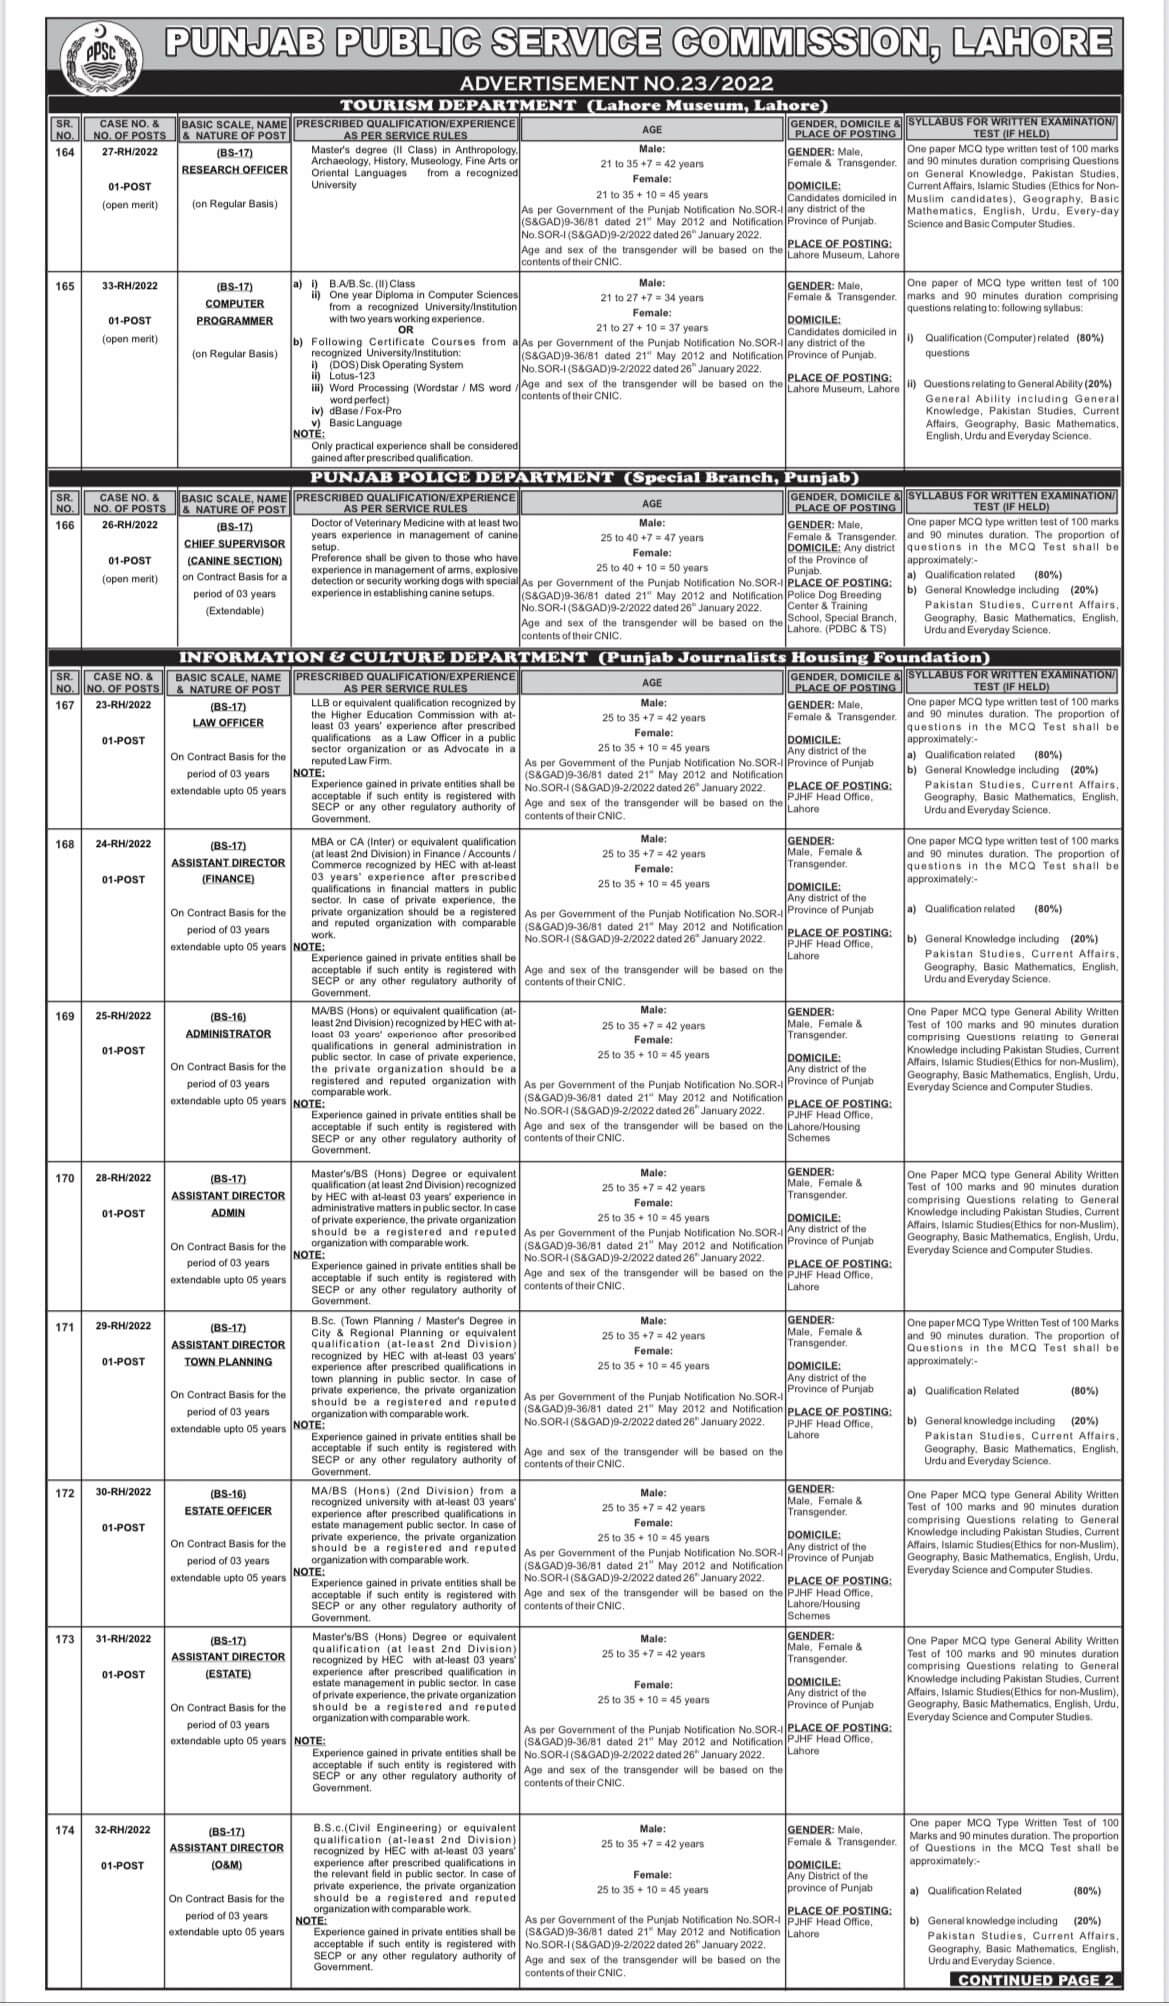 PPSC Jobs Advertisement # 23/2022 for Police Department & Others